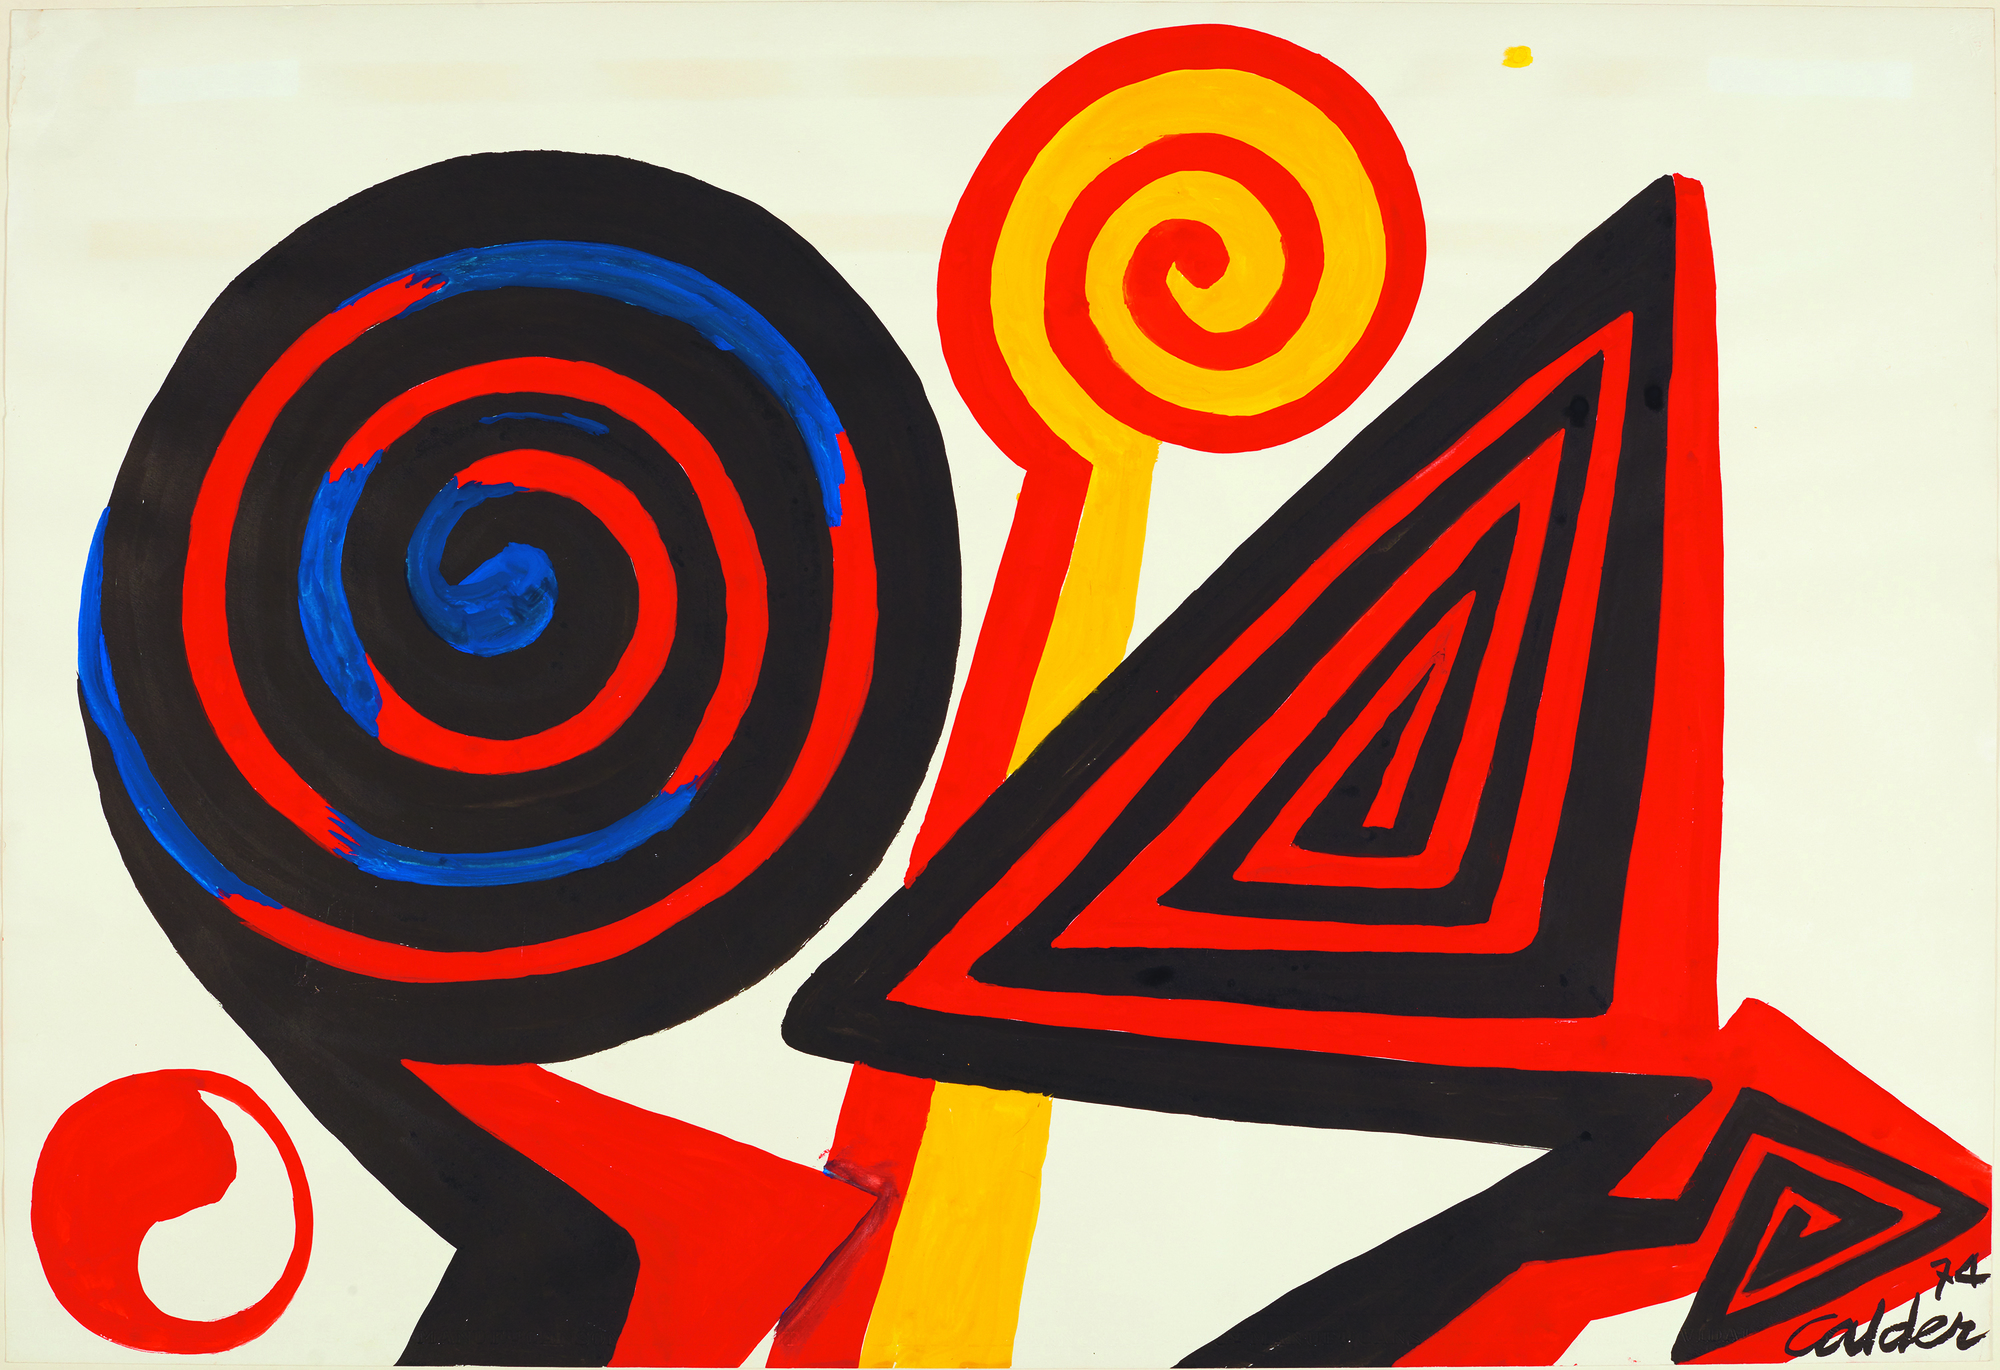 ALEXANDER CALDER - Directions - gouache and ink on paper - 29 1/2 x 43 1/4 in.